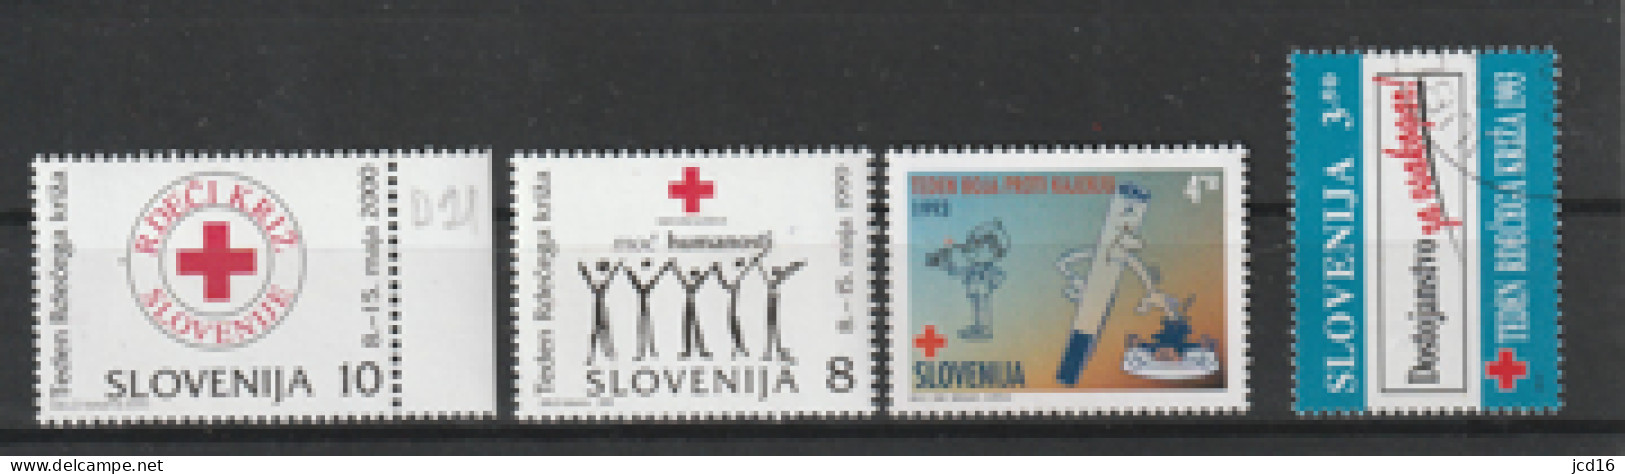 Lot 4 Timbres SLOVENIE Croix Rouge Red Cross  Neufs - Rode Kruis